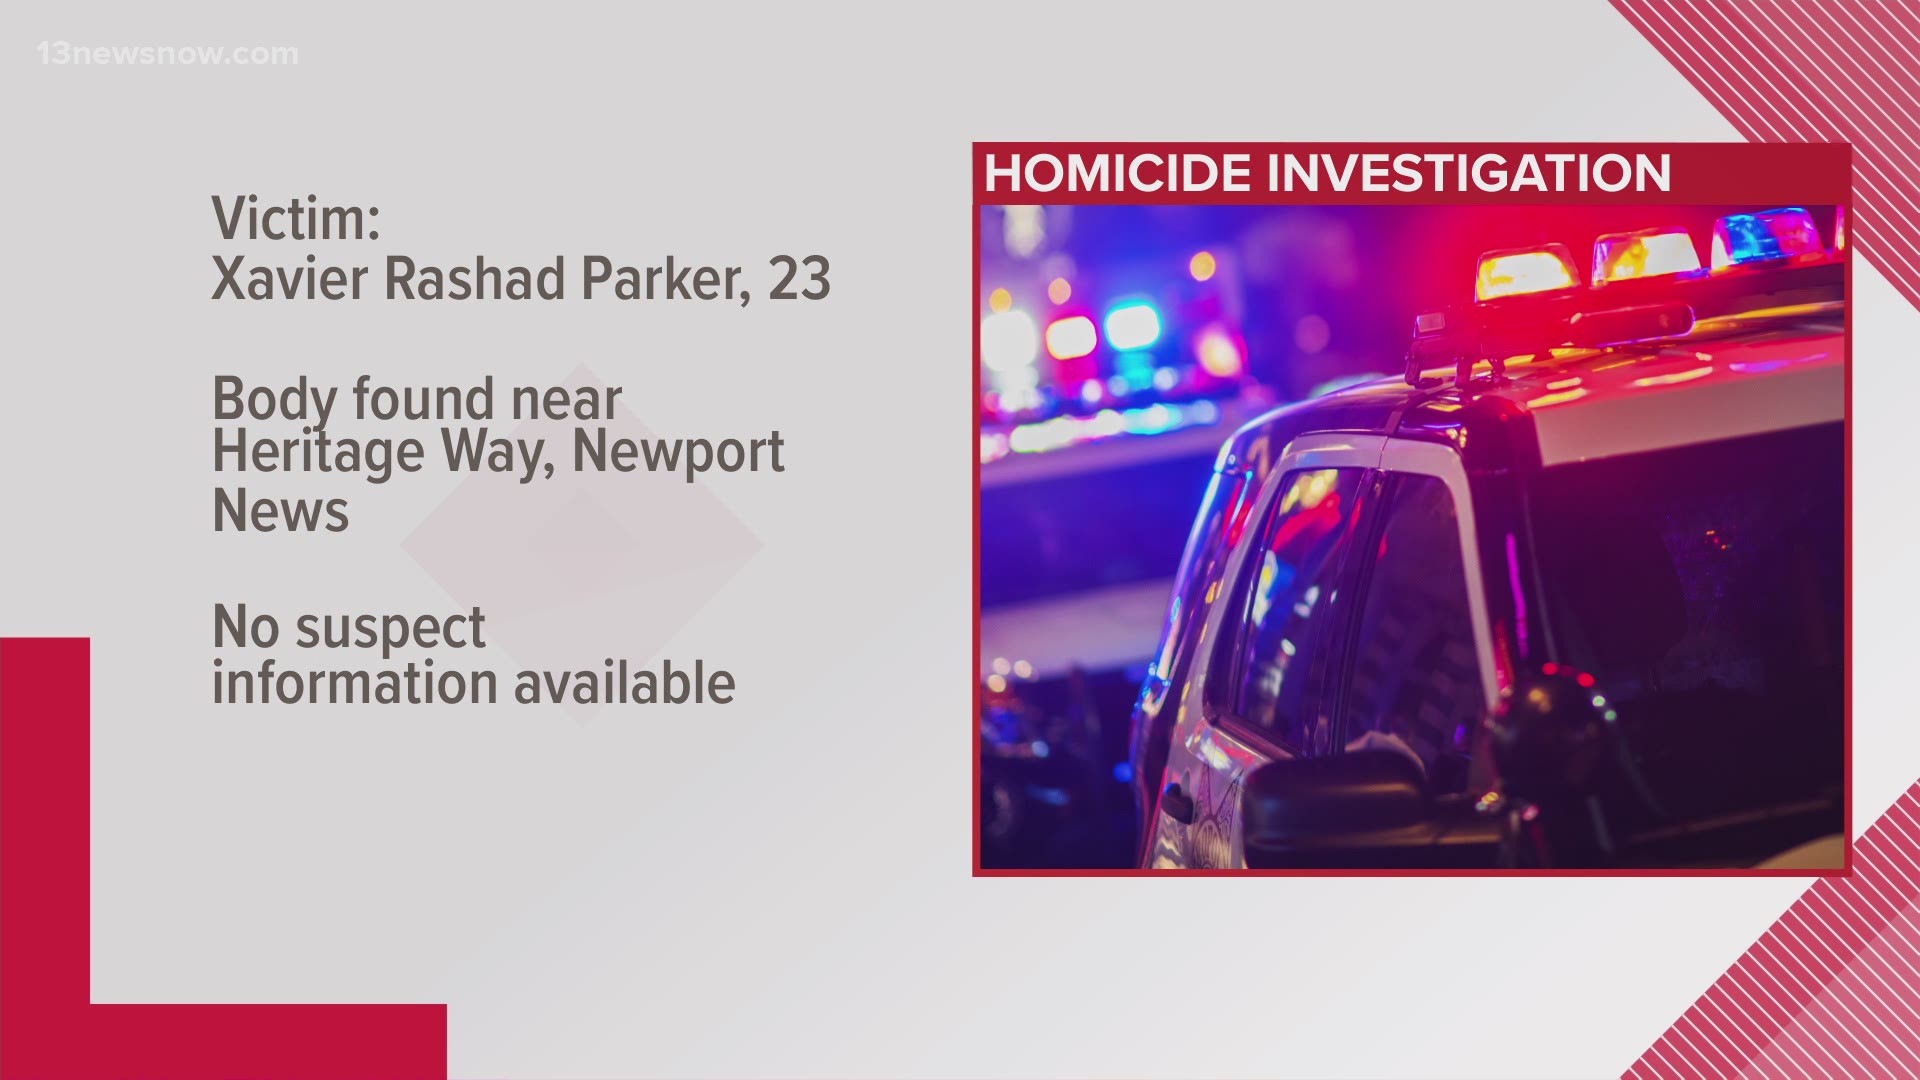 Officers found a man dead from at least one gunshot wound on September 26, 2020. He was just identified as 23-year-old Xavier Parker.